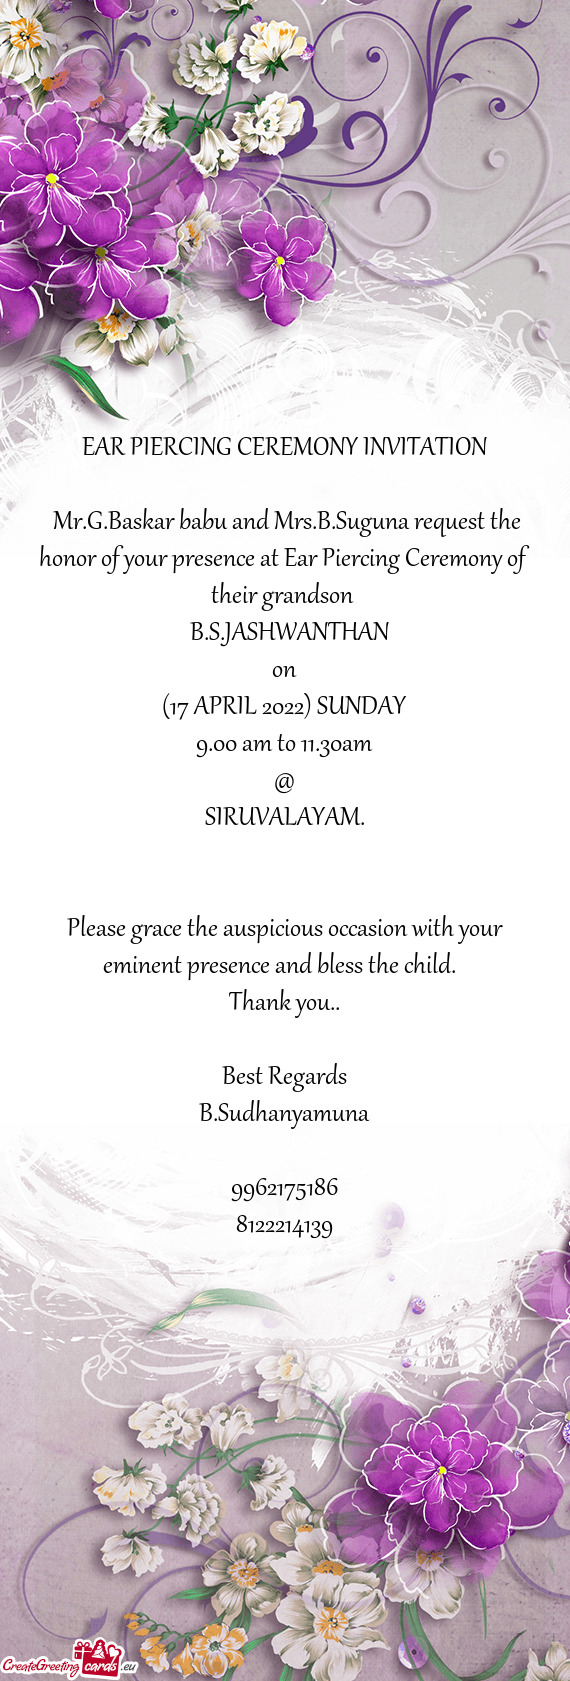 Mr.G.Baskar babu and Mrs.B.Suguna request the honor of your presence at Ear Piercing Ceremony of th